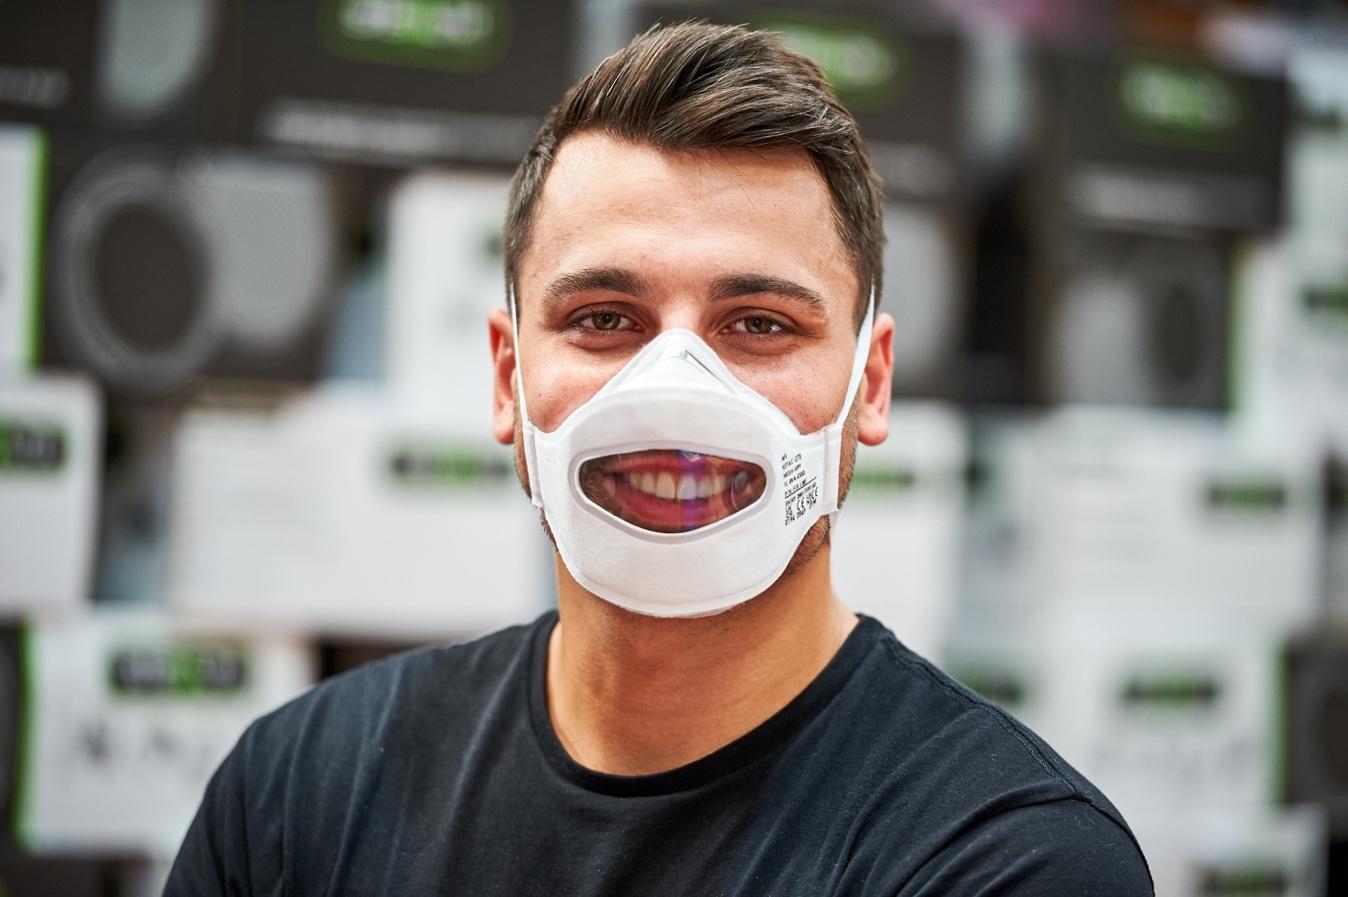 A person with a mask on the face
Description automatically generated with low confidence